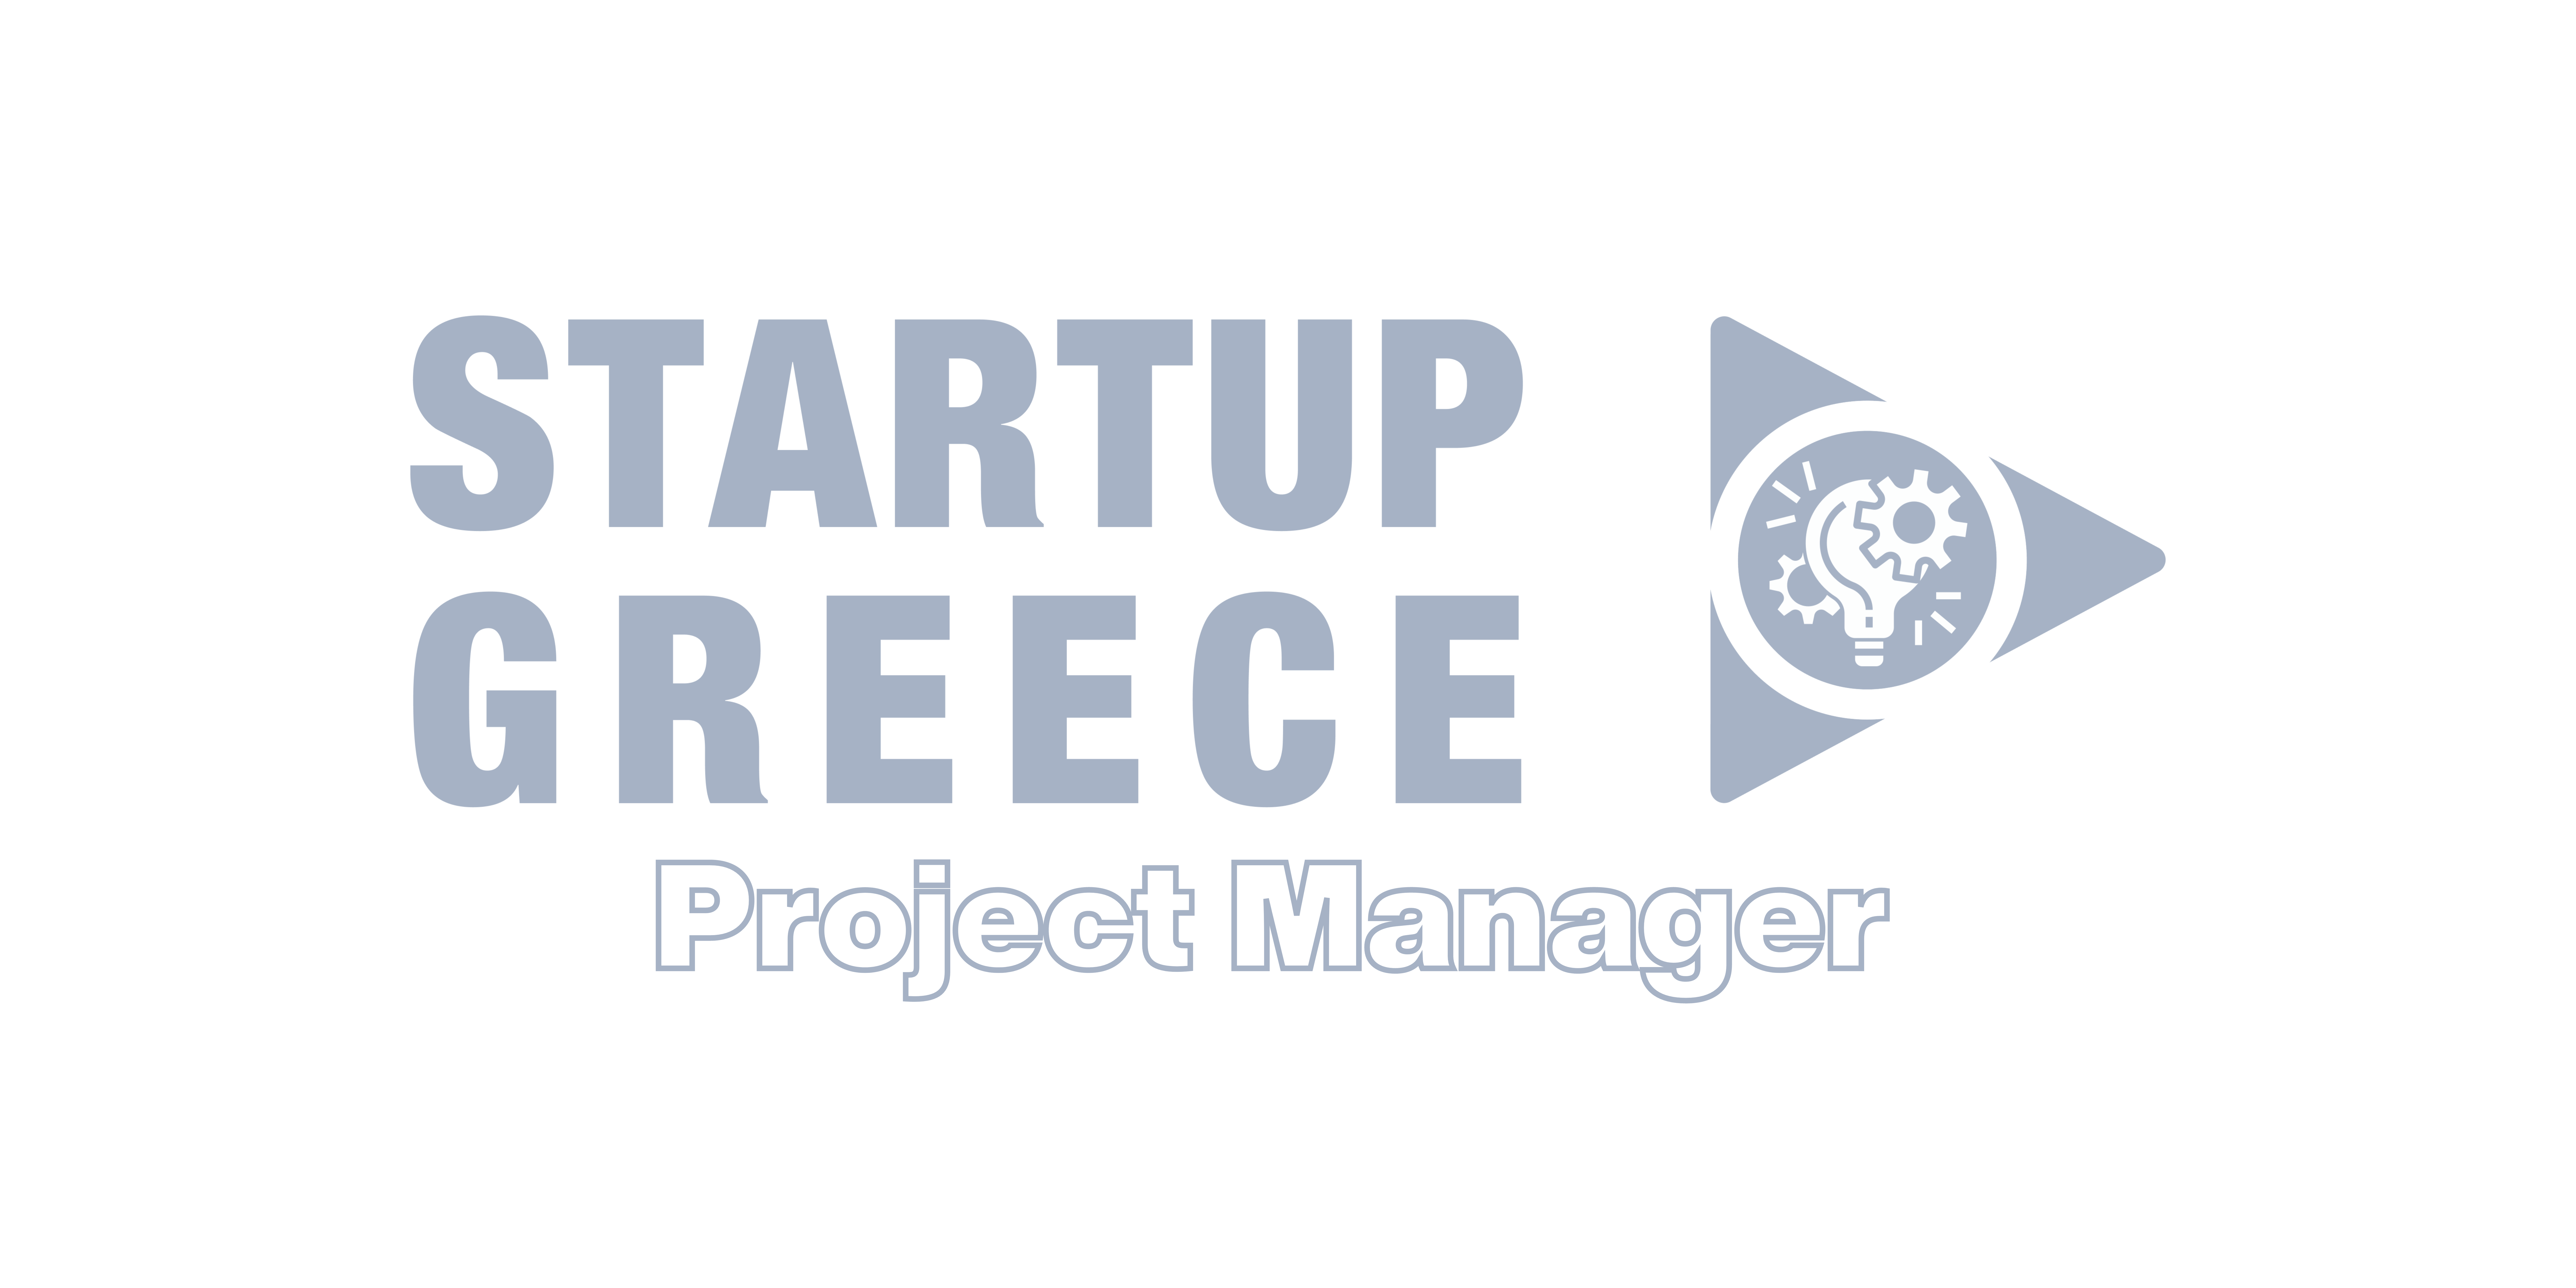 EU Project Manager